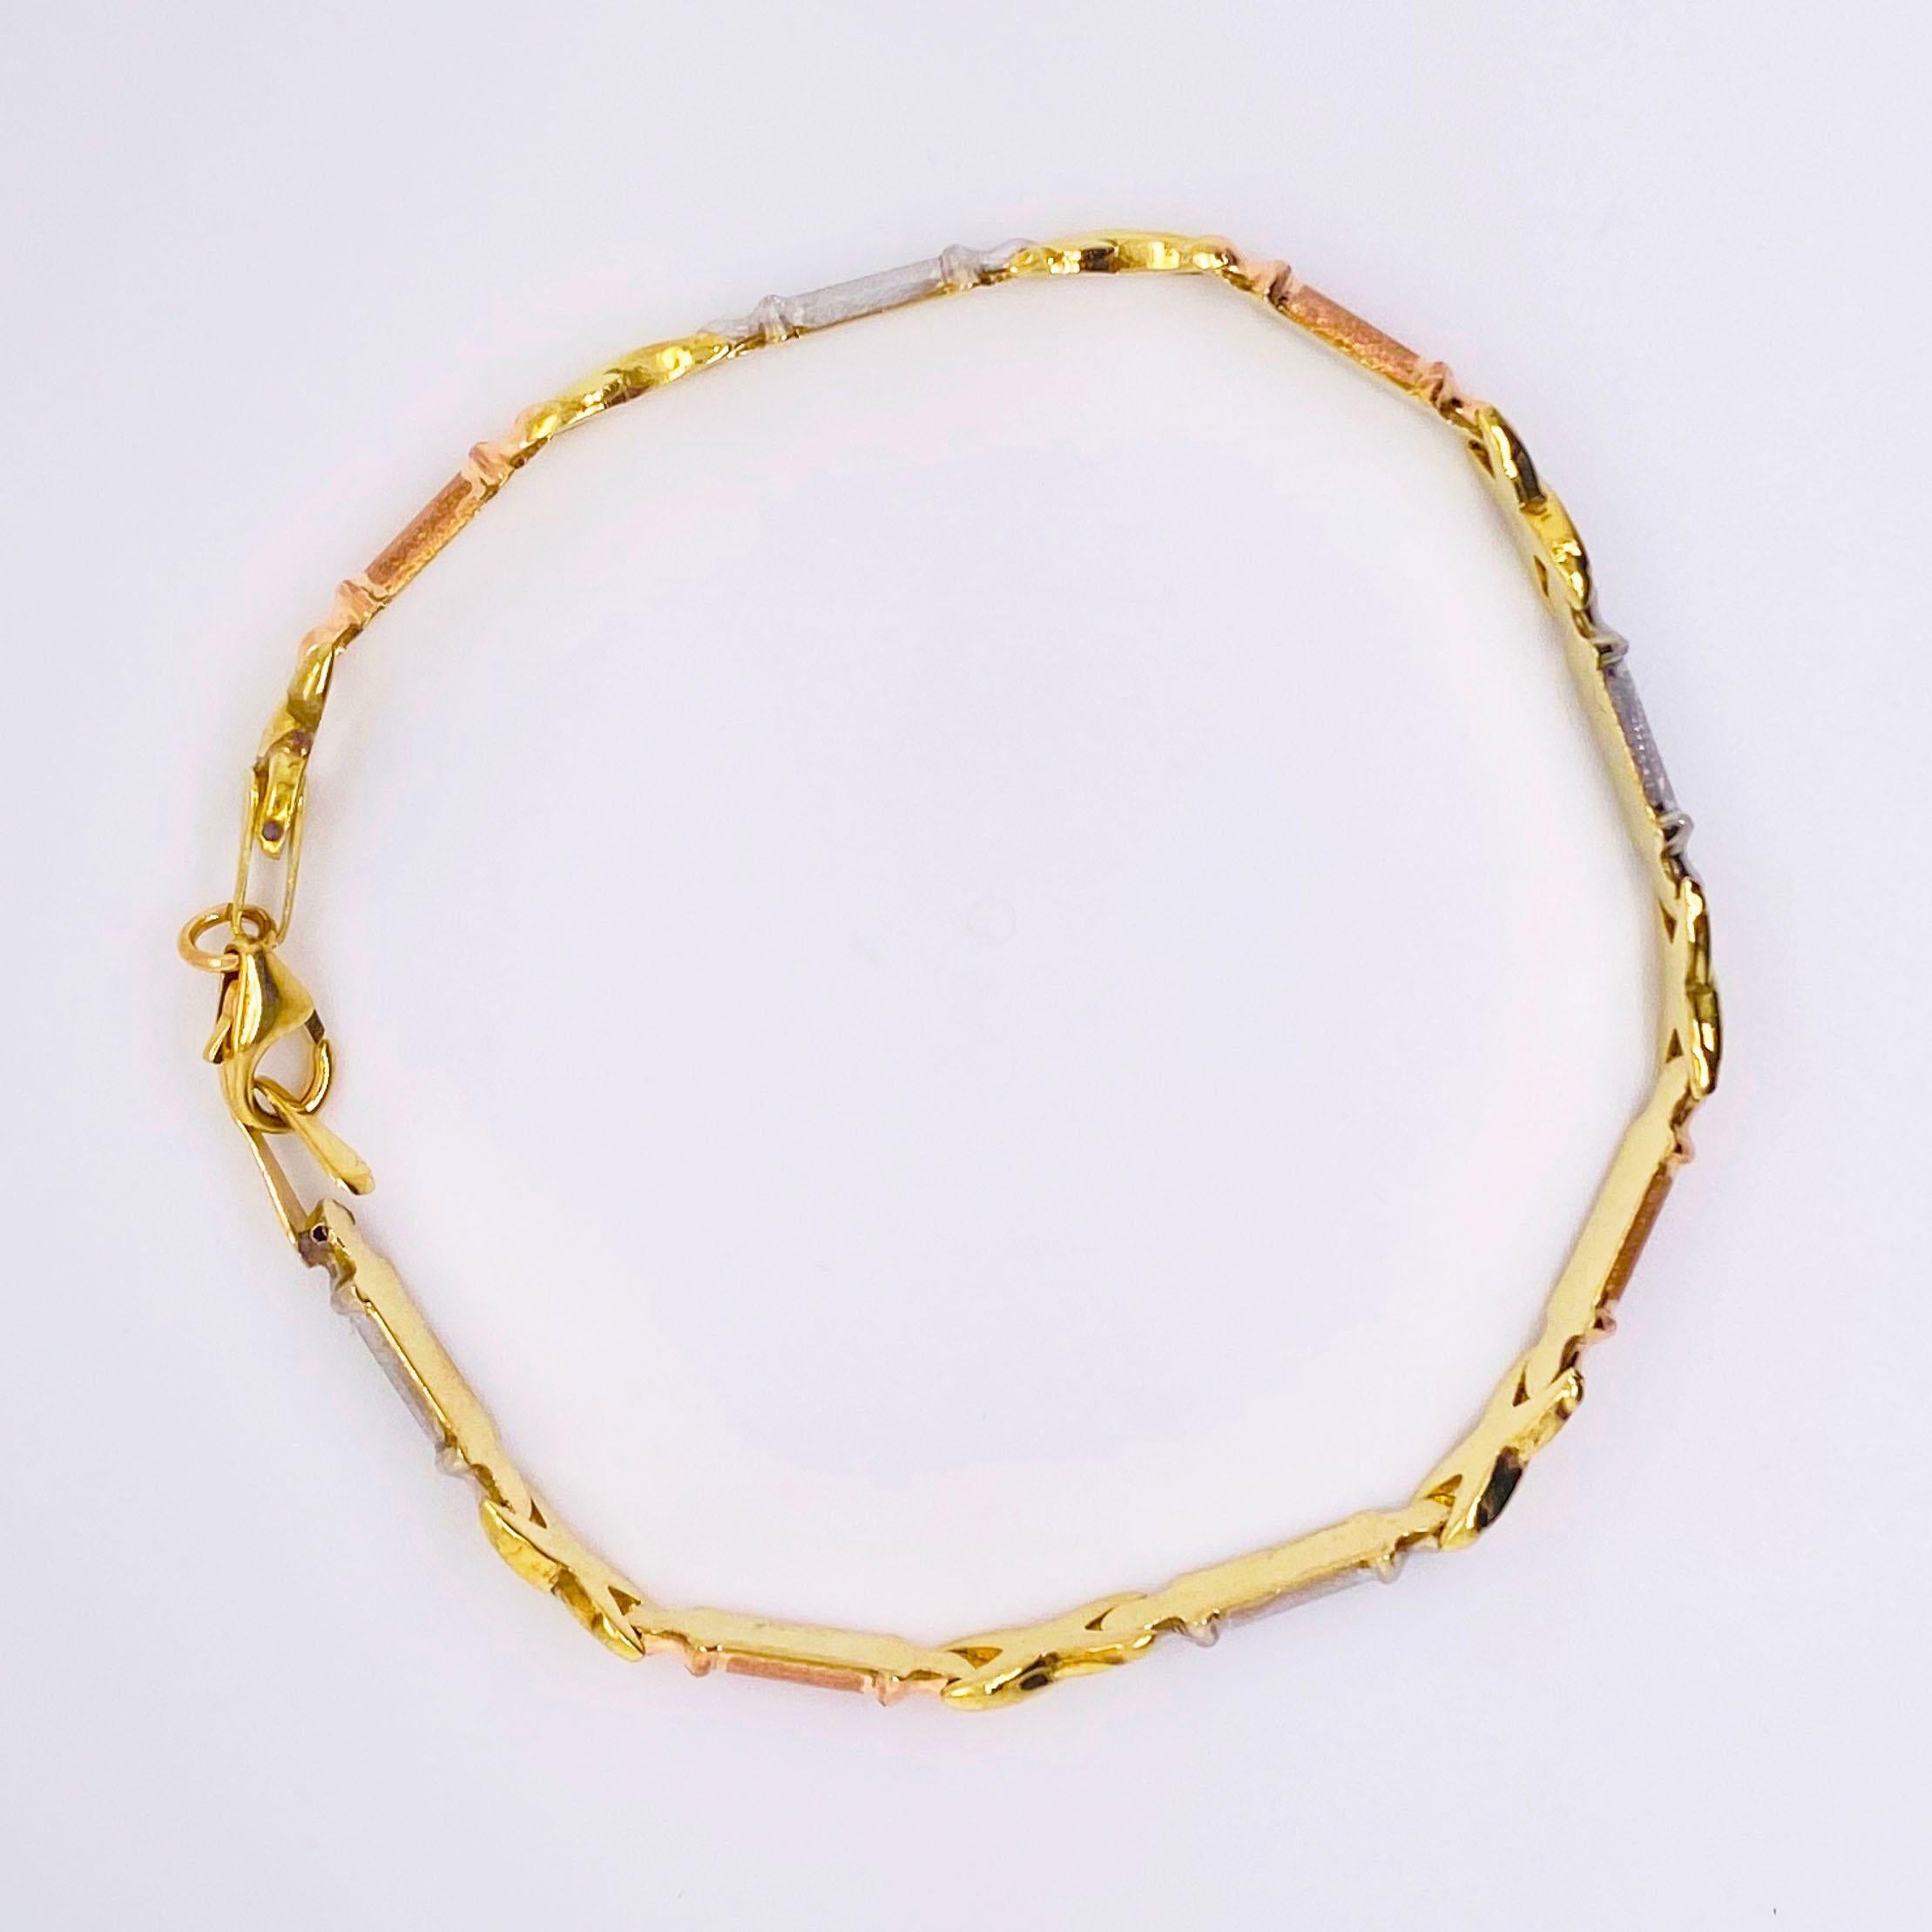 The gorgeous tri-colored gold bracelet is a handmade piece made with 10 karat gold. Each link is alternating in a unique pattern of white gold, yellow gold, rose gold, yellow gold, etc. The multi-colored gold allows this bracelet to go with every